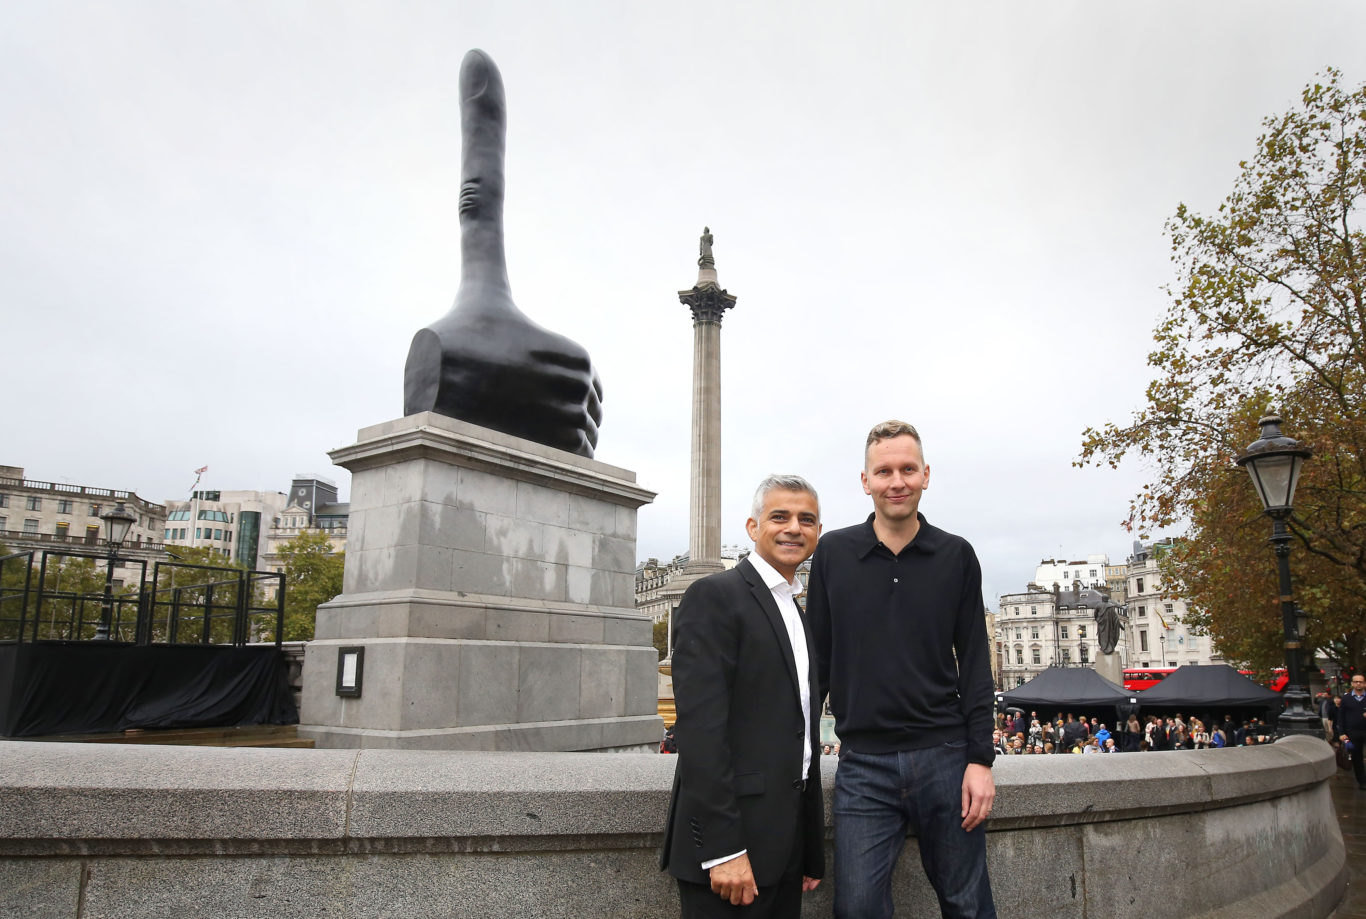 Mayor of London Sadiq Khan (left) with artist David Shrigley at the unveiling of Really Good in 2016 (Philip Toscano/PA)